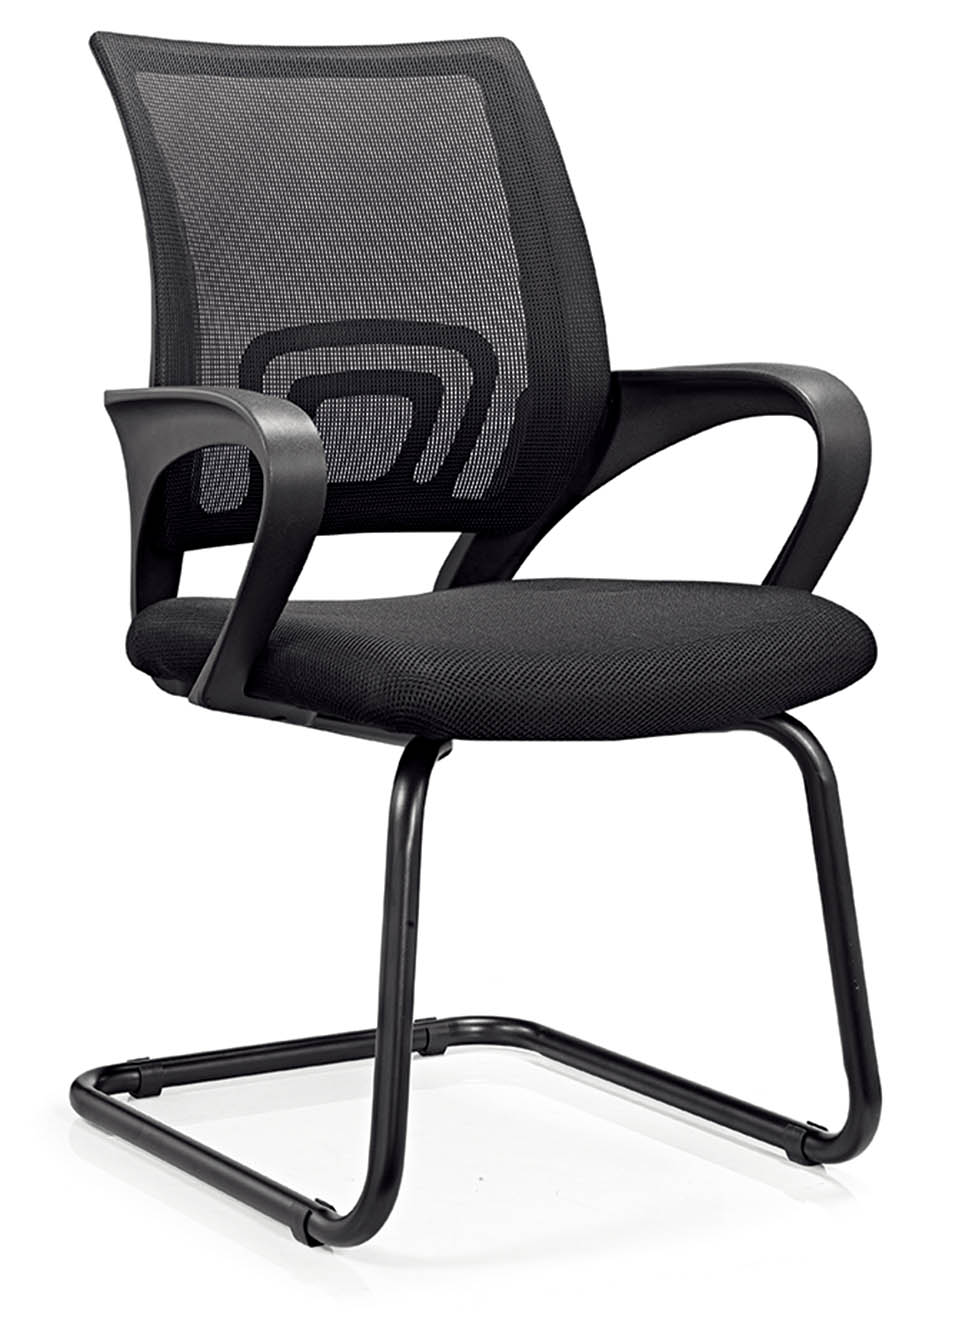 Cheapest Mesh Office Conference Chairs Without Wheels Buy Office